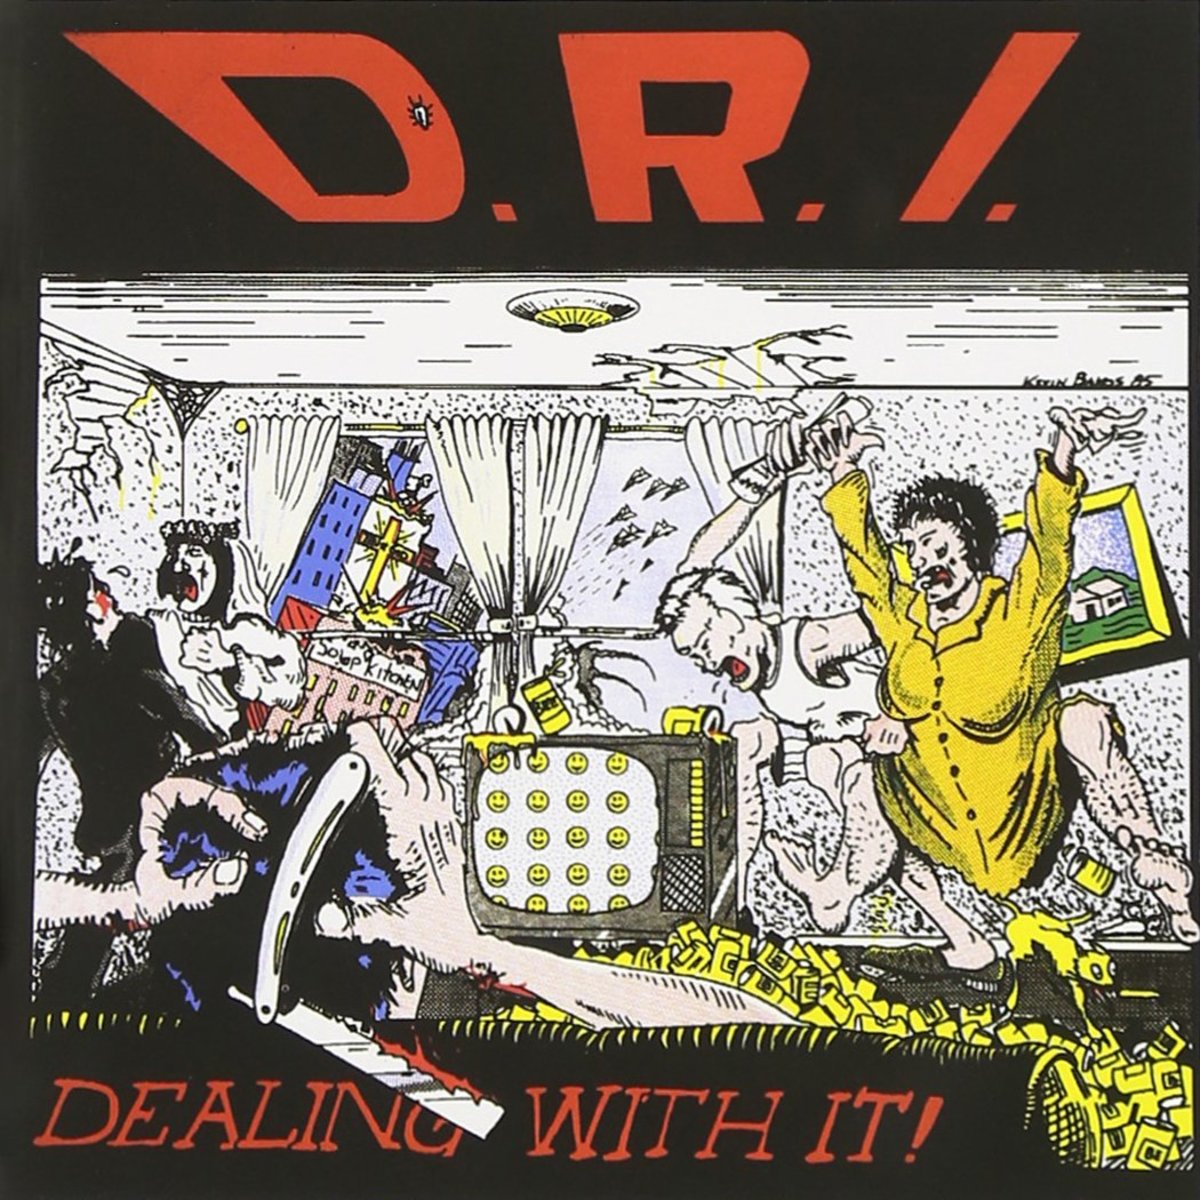 review-of-the-album-dealing-with-it-by-american-hardcore-punk-band-dri